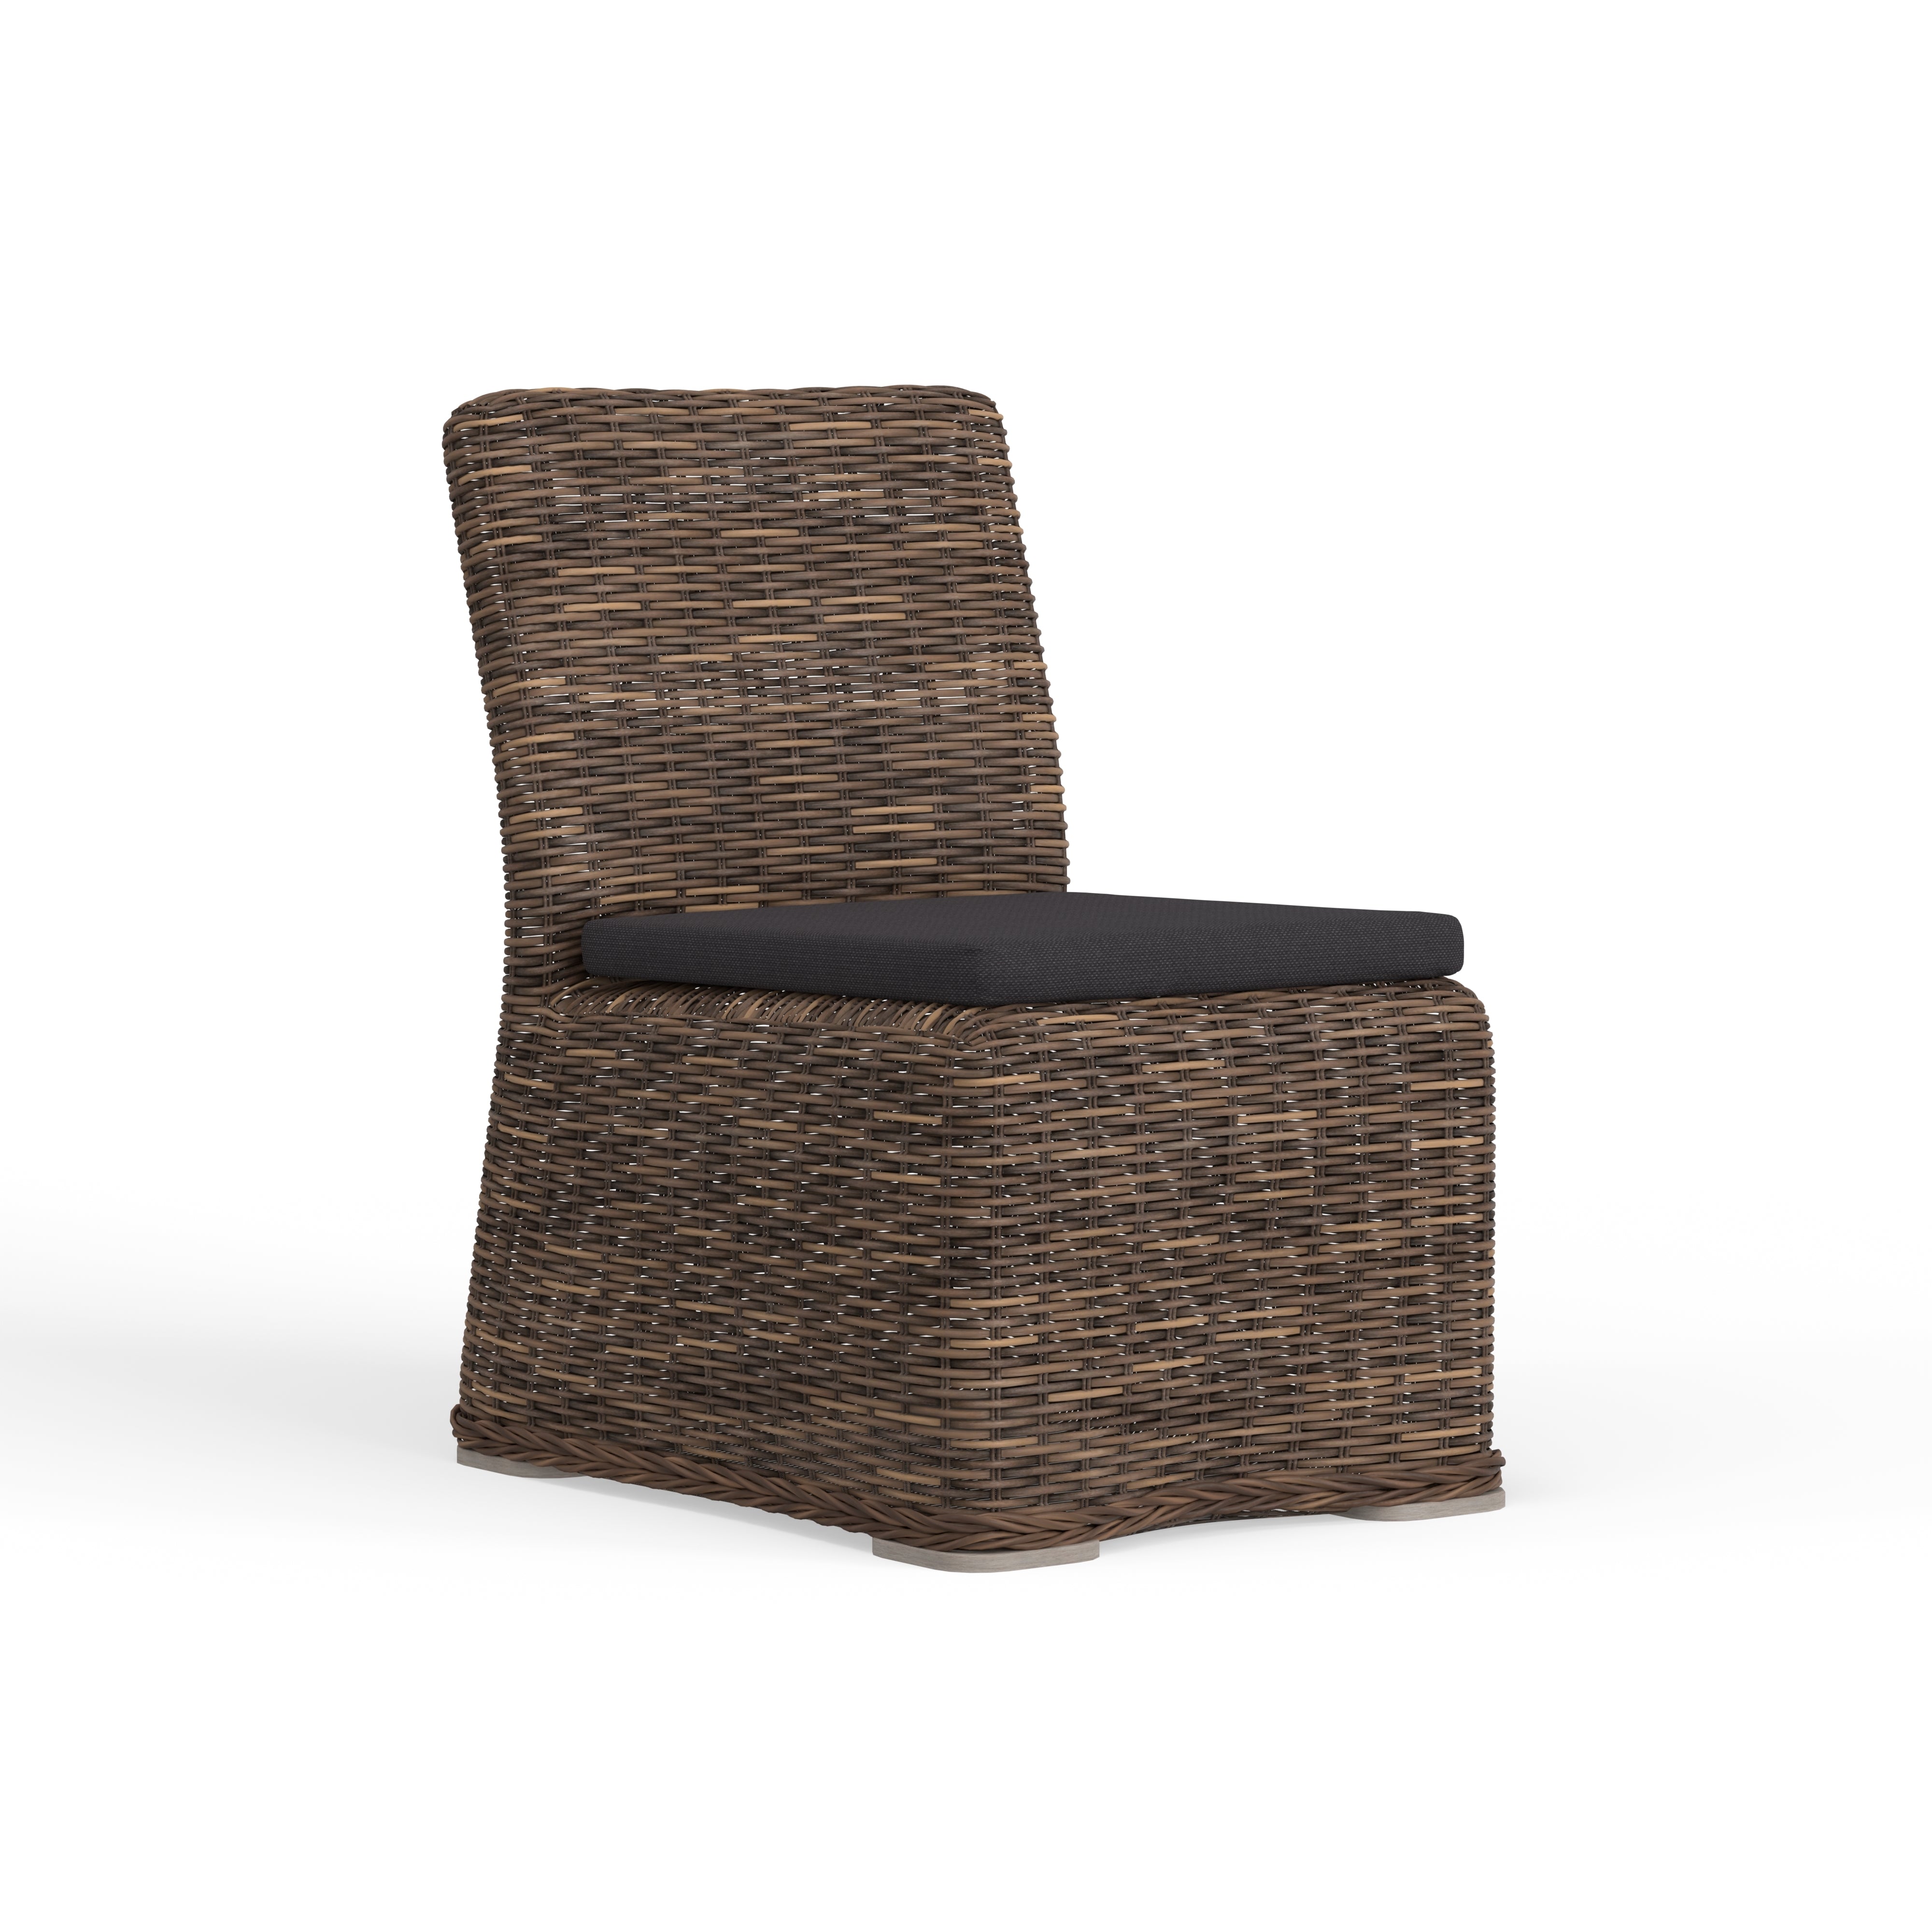 Highest Quality Modern Wicker Furniture For Outdoors